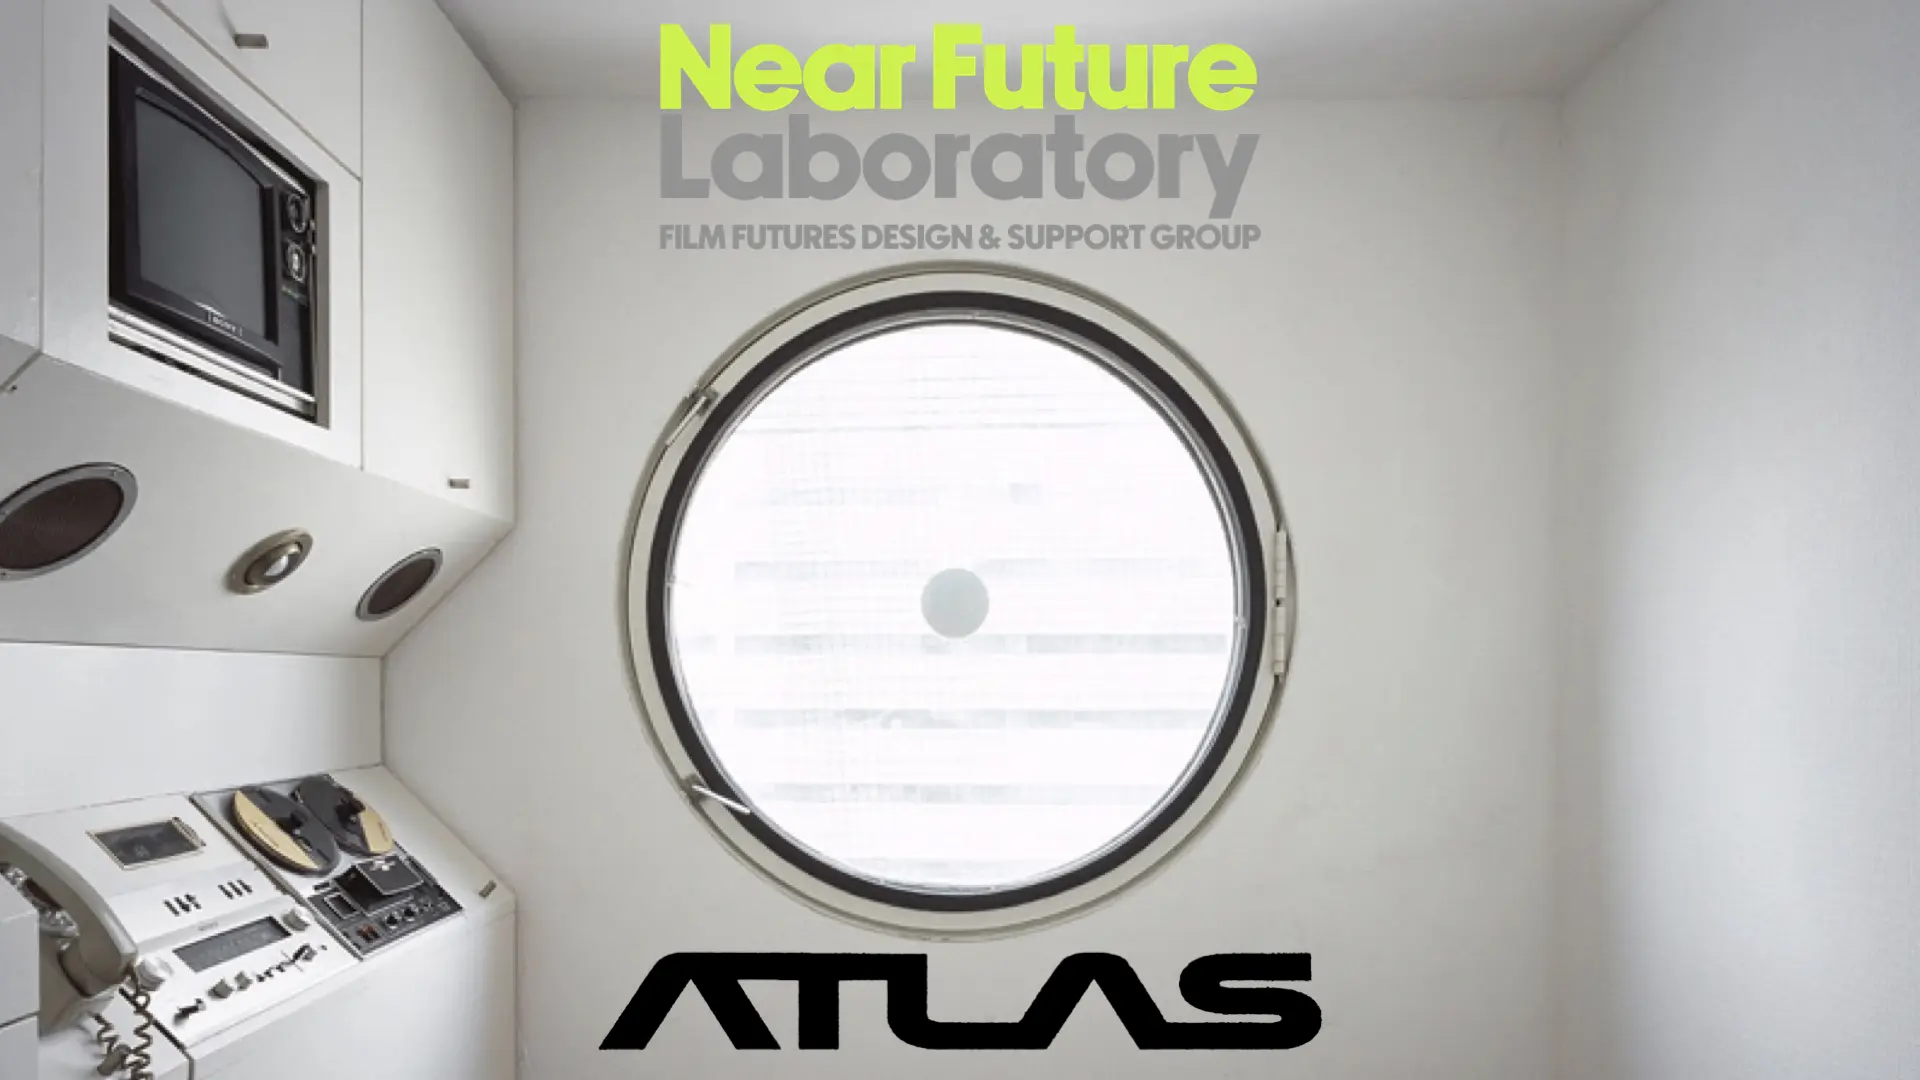 Image from the Near Future Laboratory project where Julian Bleecker was a Futurist Technical Consultant on the Netflix film by Brad Peyton, 'Atlas'